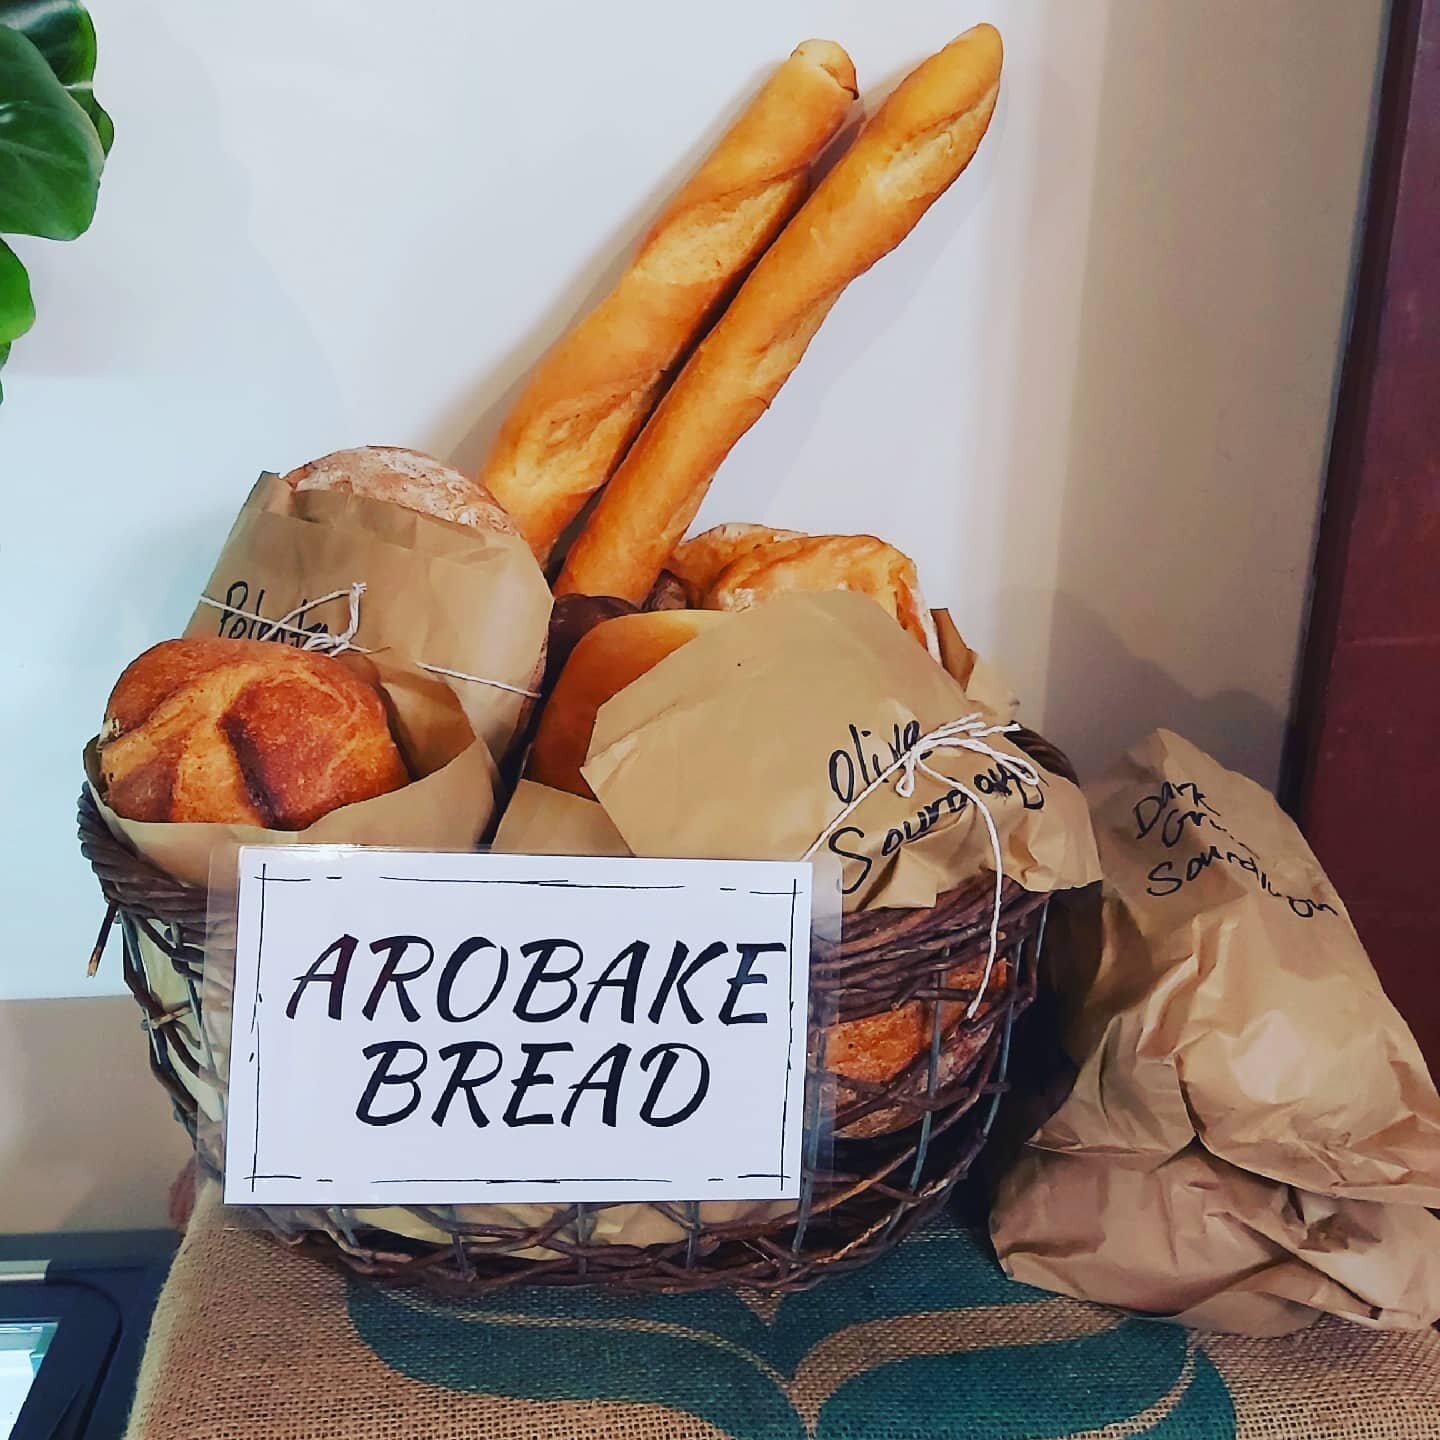 Now stocking Arobake bread.
We use this Sourdoughand Caraway Rye for our sandwiches so you've already been eating the stuff!
Now you can take a loaf home with you on SATURDAYS only!
Great weekend snack.

Stock up for Mother's Day tomorrow ❤

#arobake